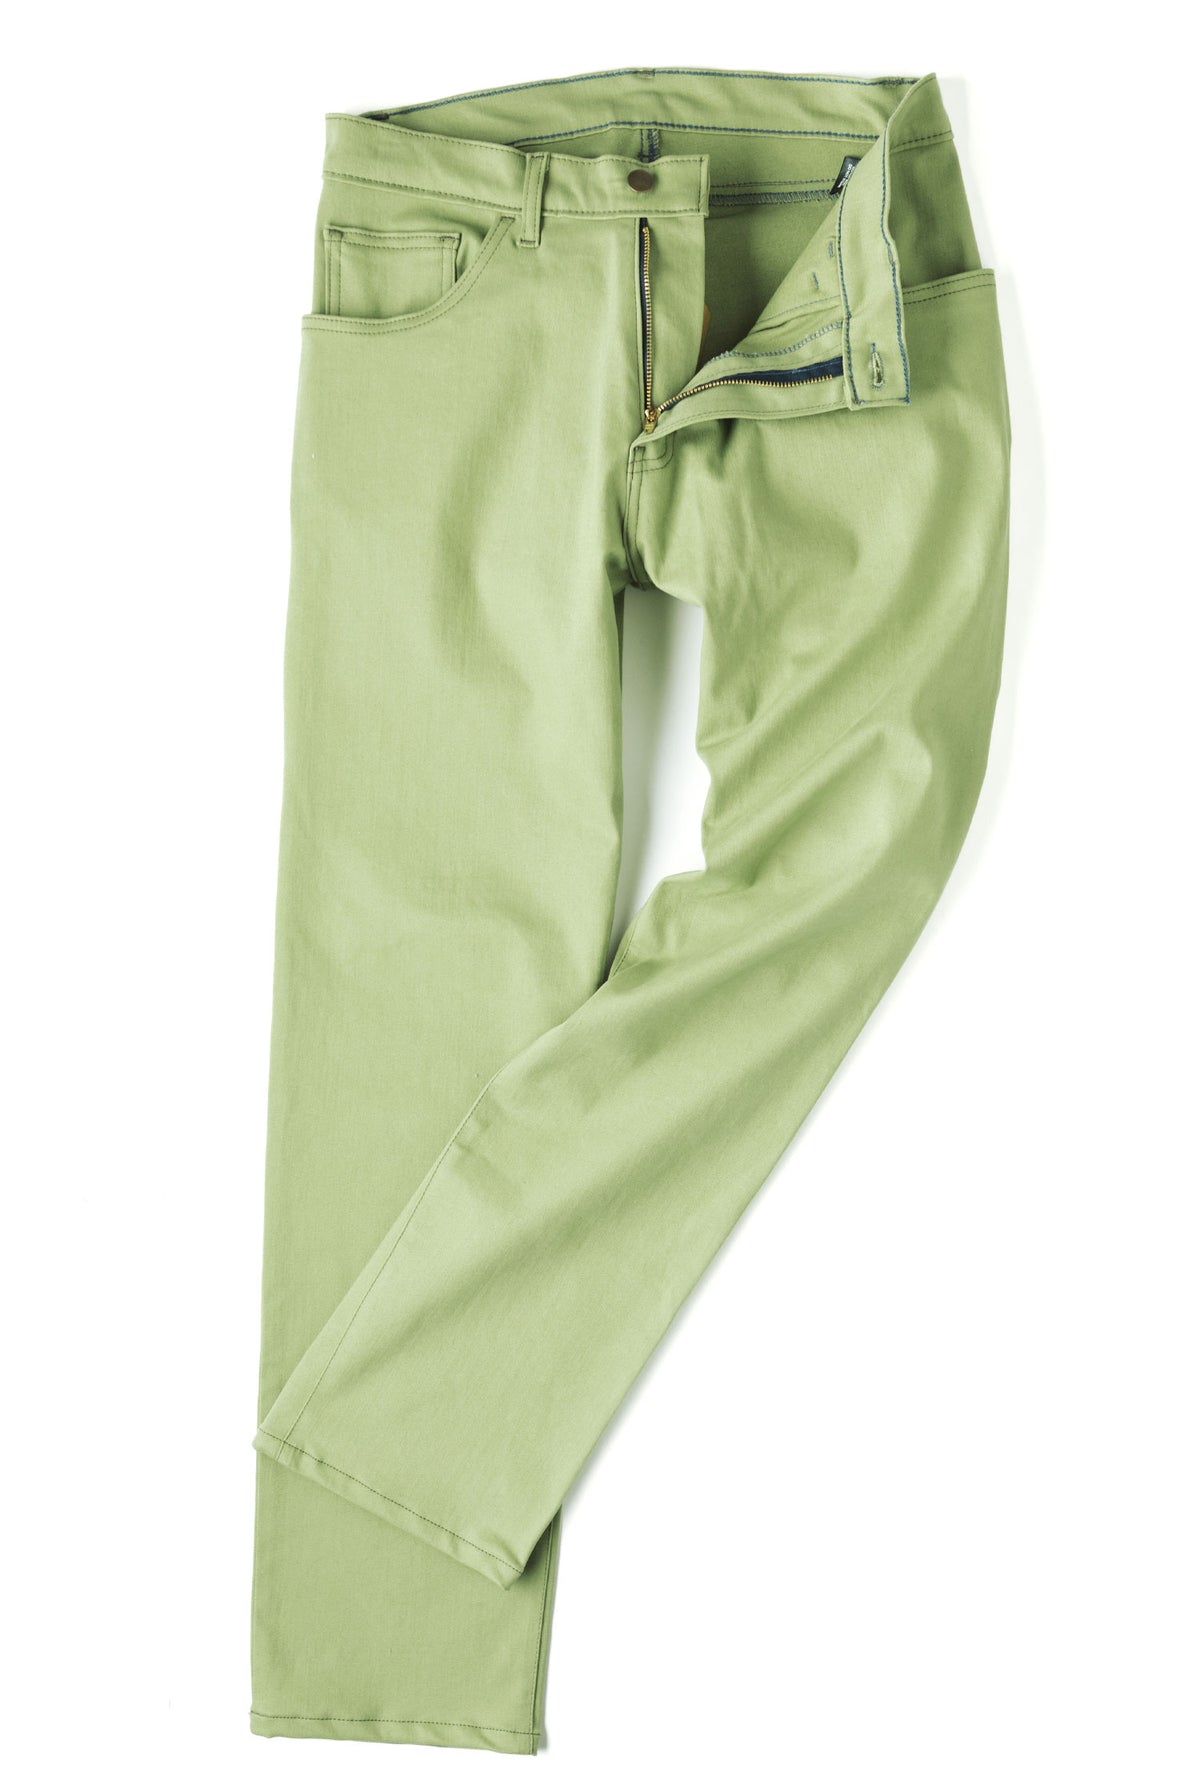 Palm Angels Logo Chino Pants in green - Palm Angels® Official